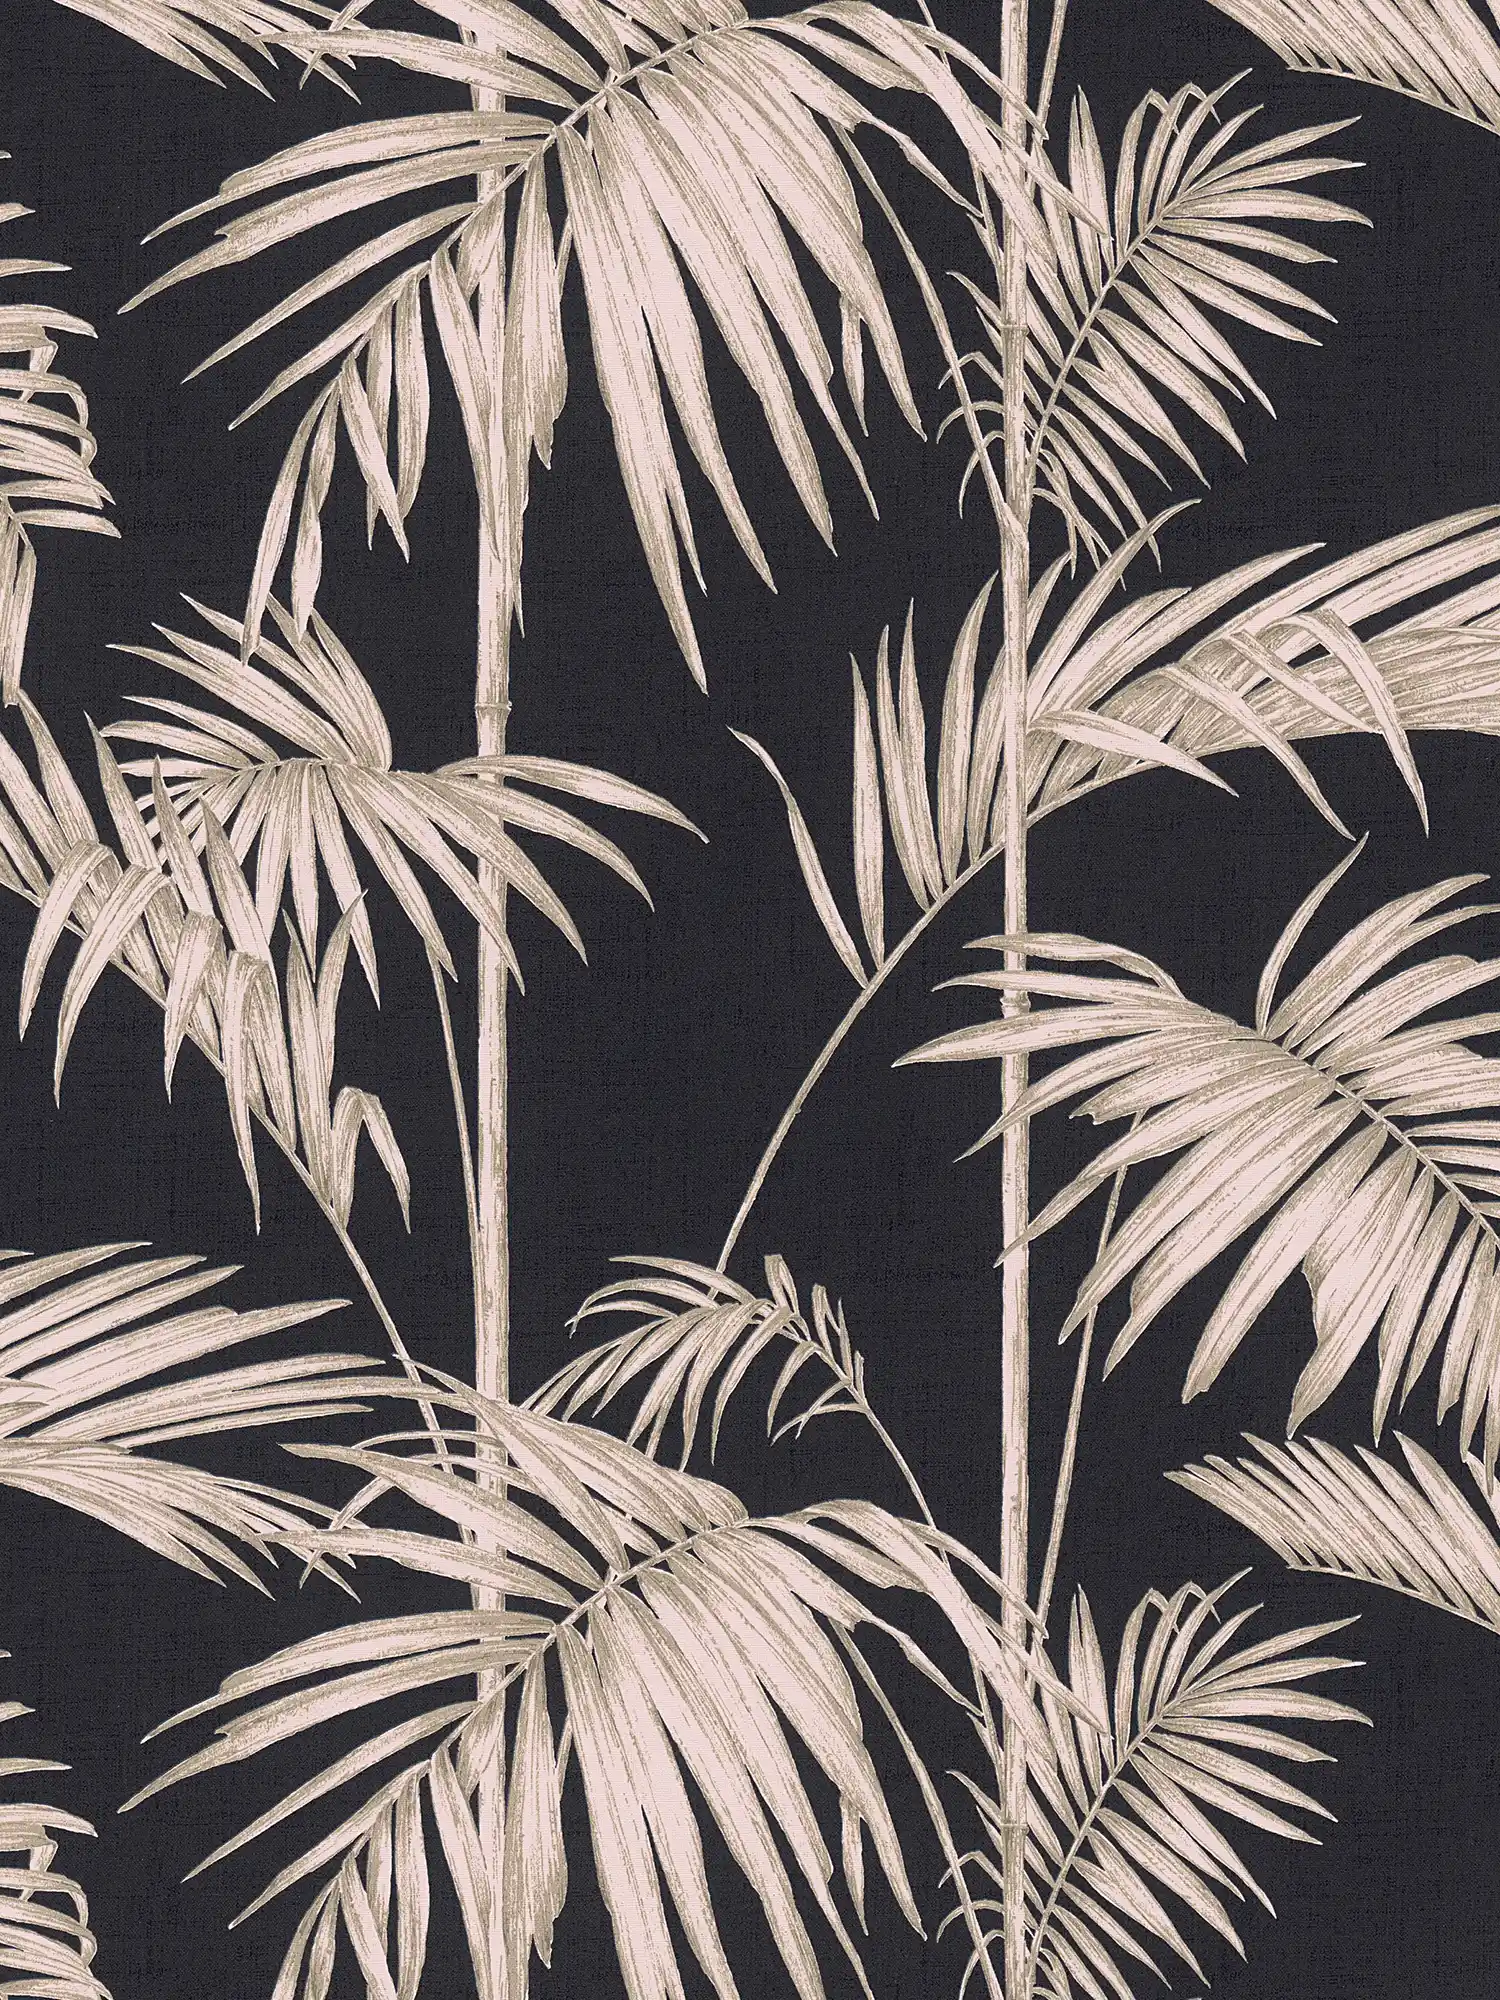 Nature wallpaper palm leaves, bamboo - pink, bronze, black
